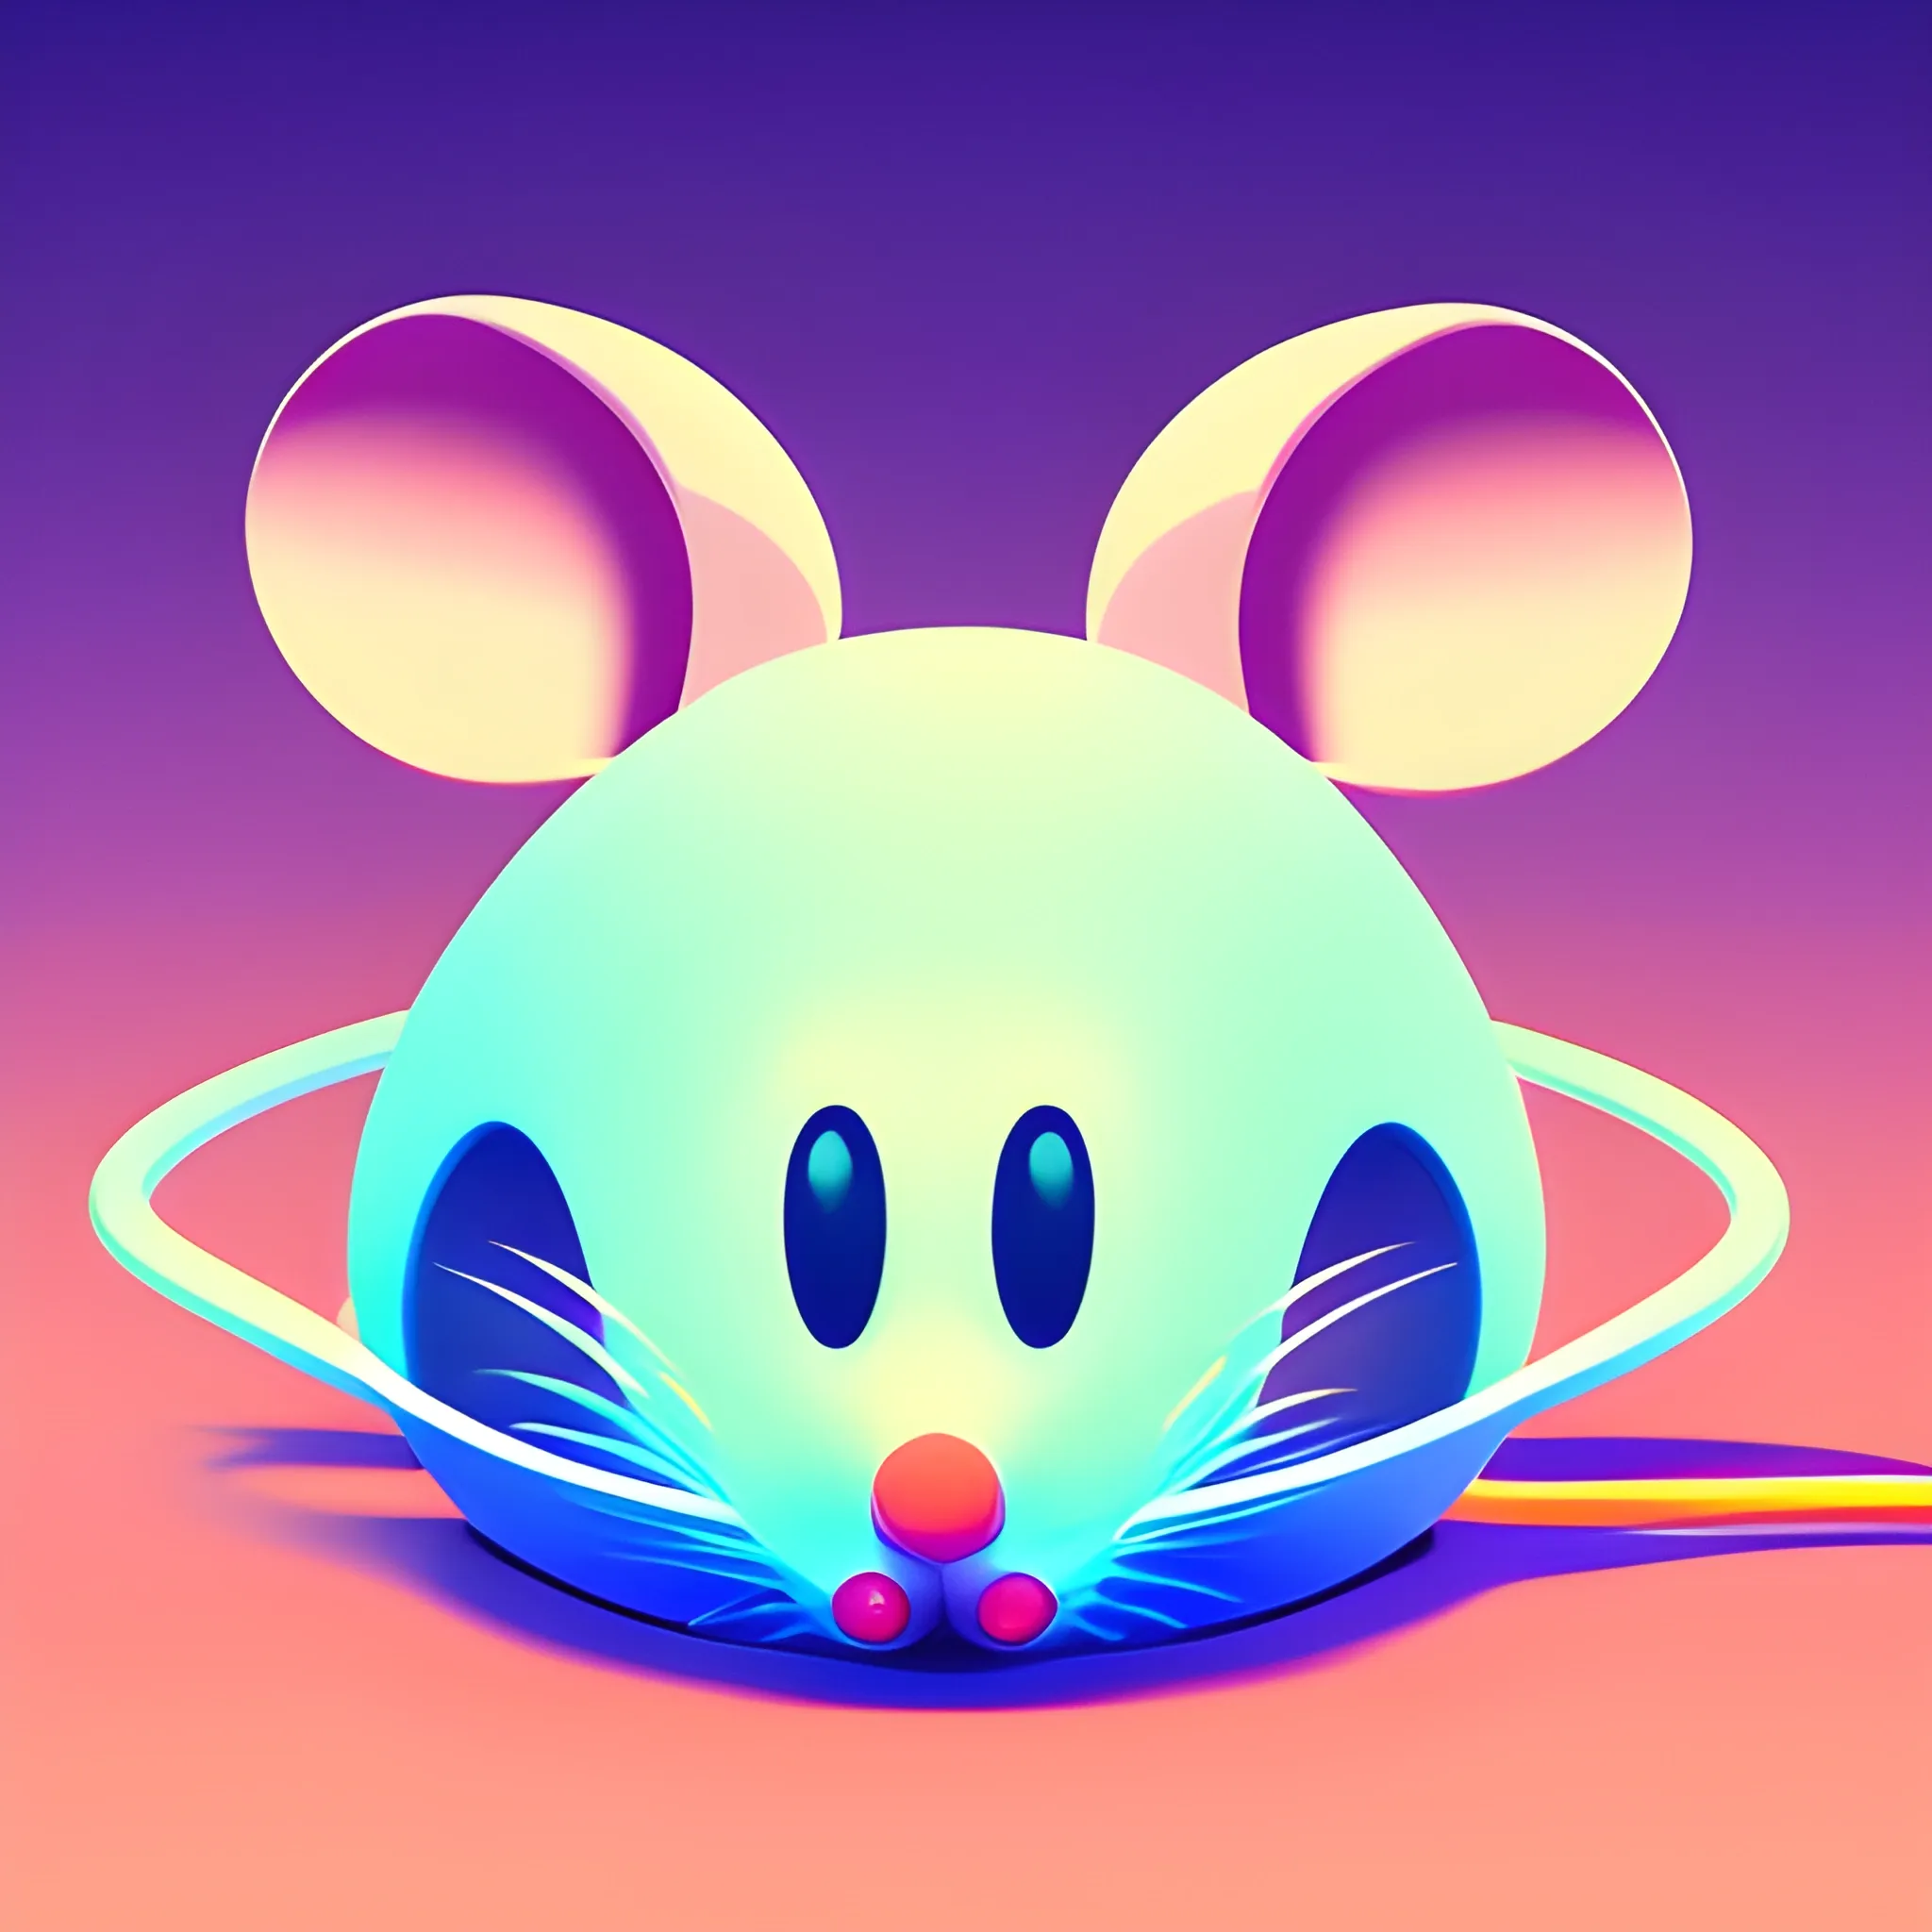 Mouse playing games,gamefi, Trippy,cute mouse